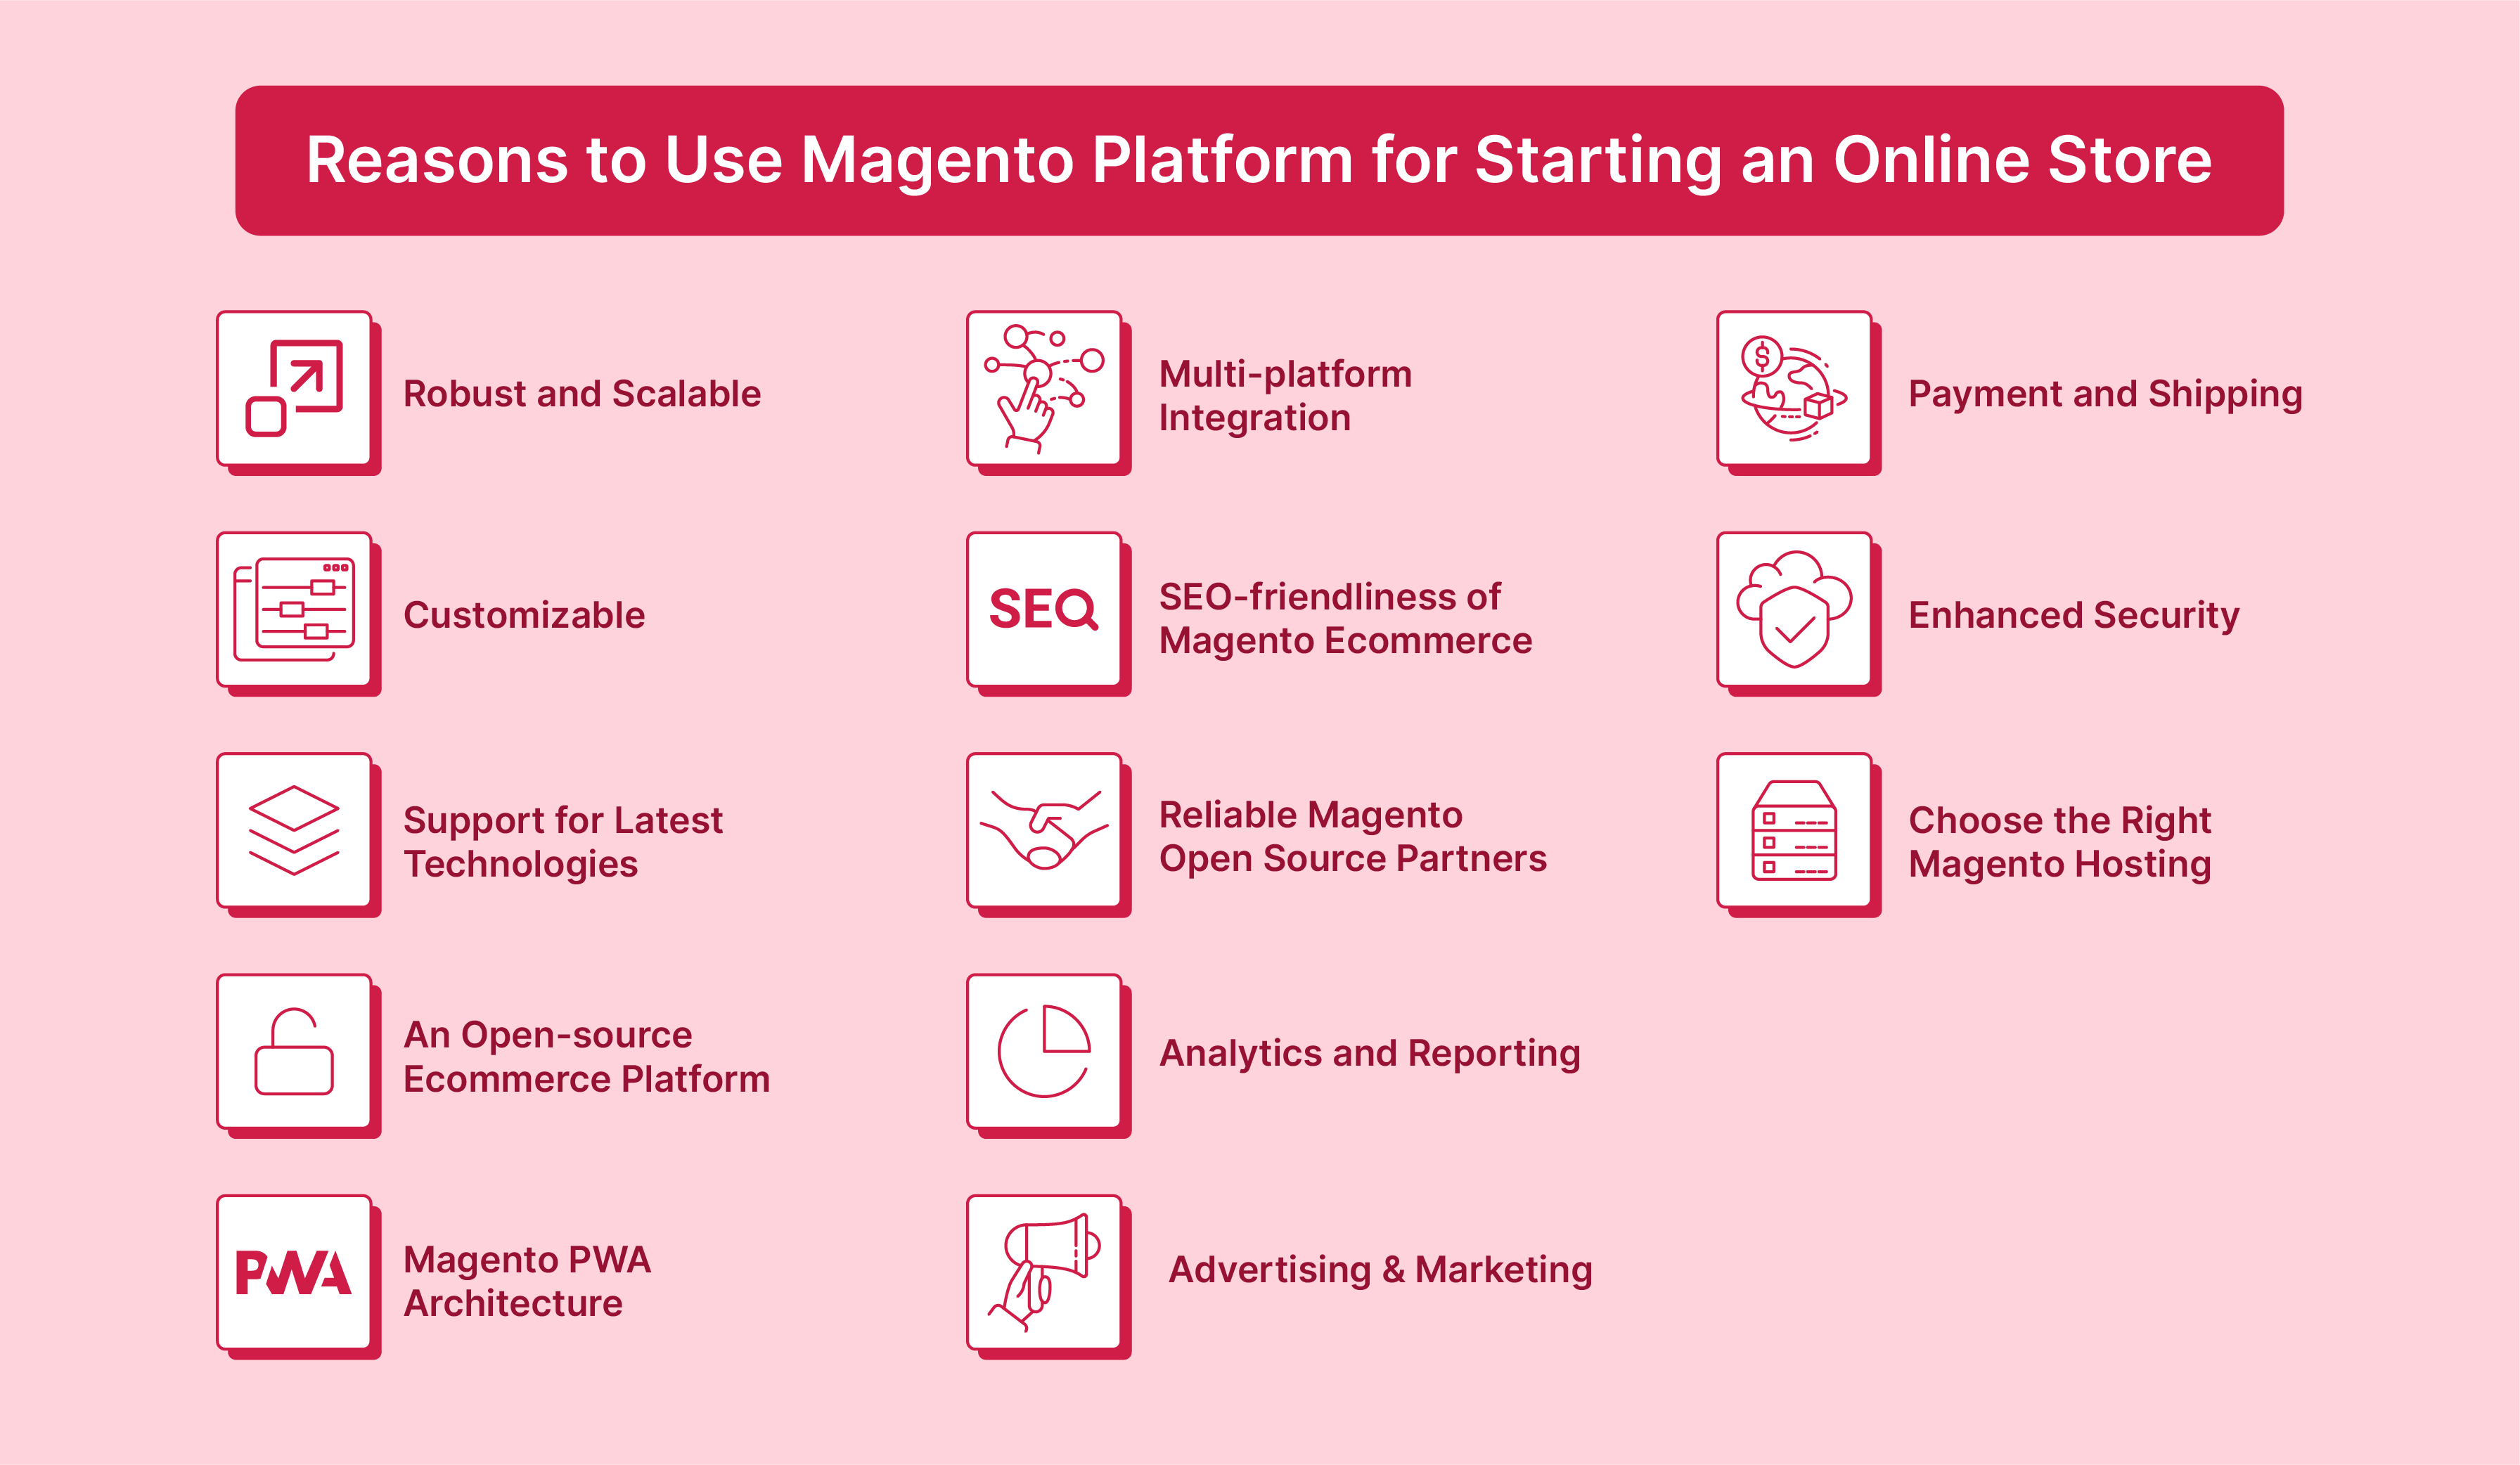 Key benefits of using Magento for online stores